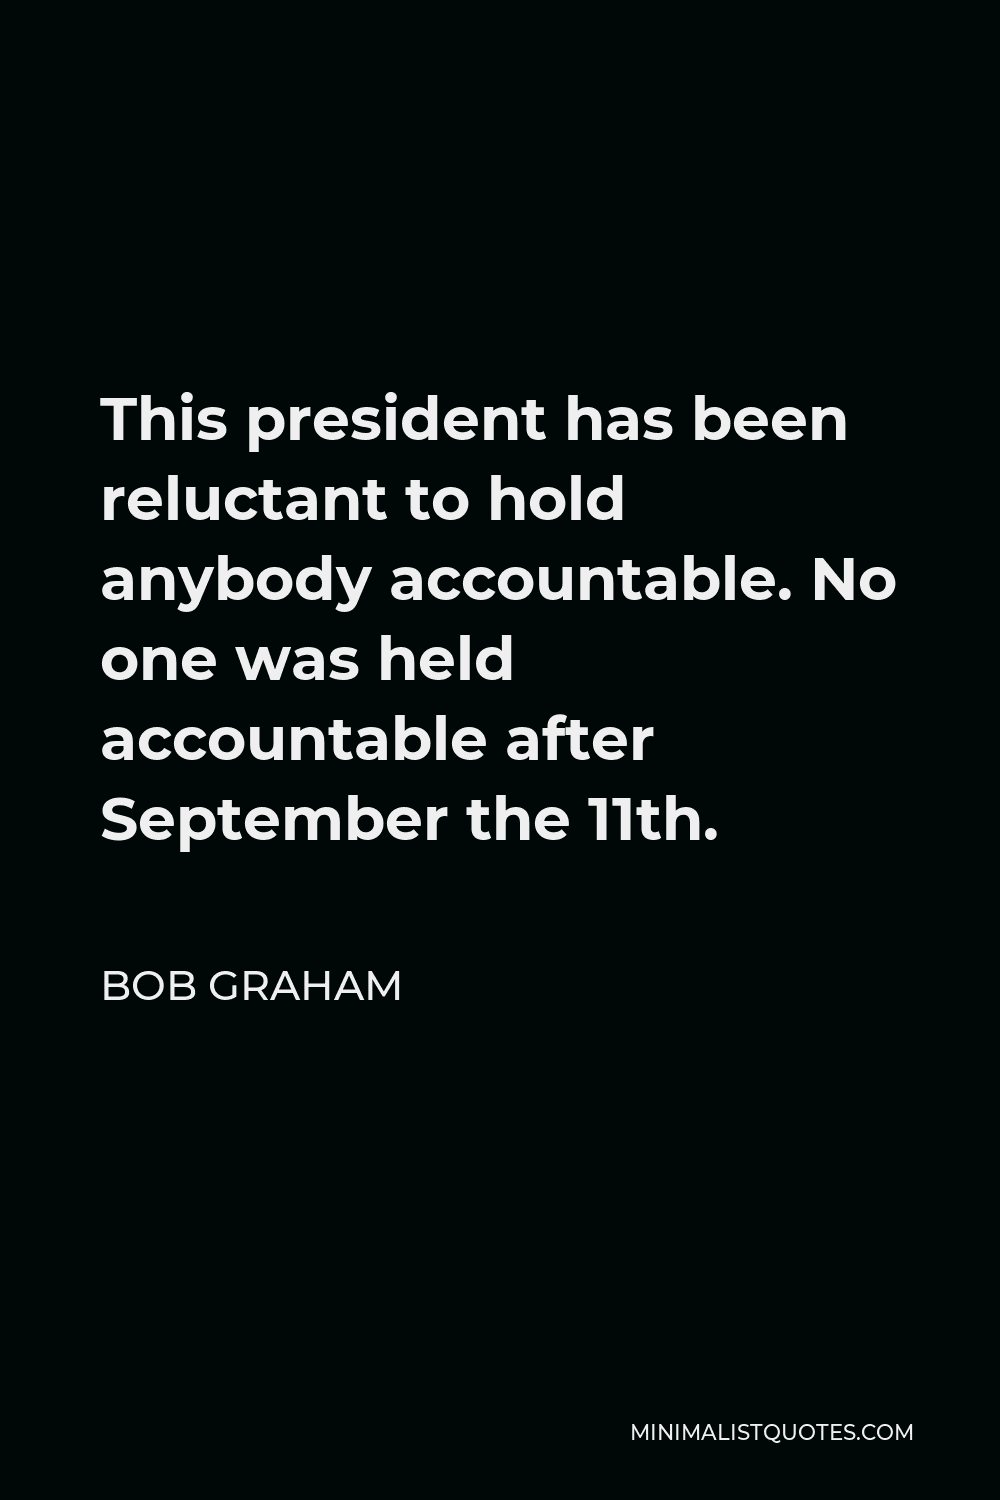 Bob Graham Quote - This president has been reluctant to hold anybody accountable. No one was held accountable after September the 11th.